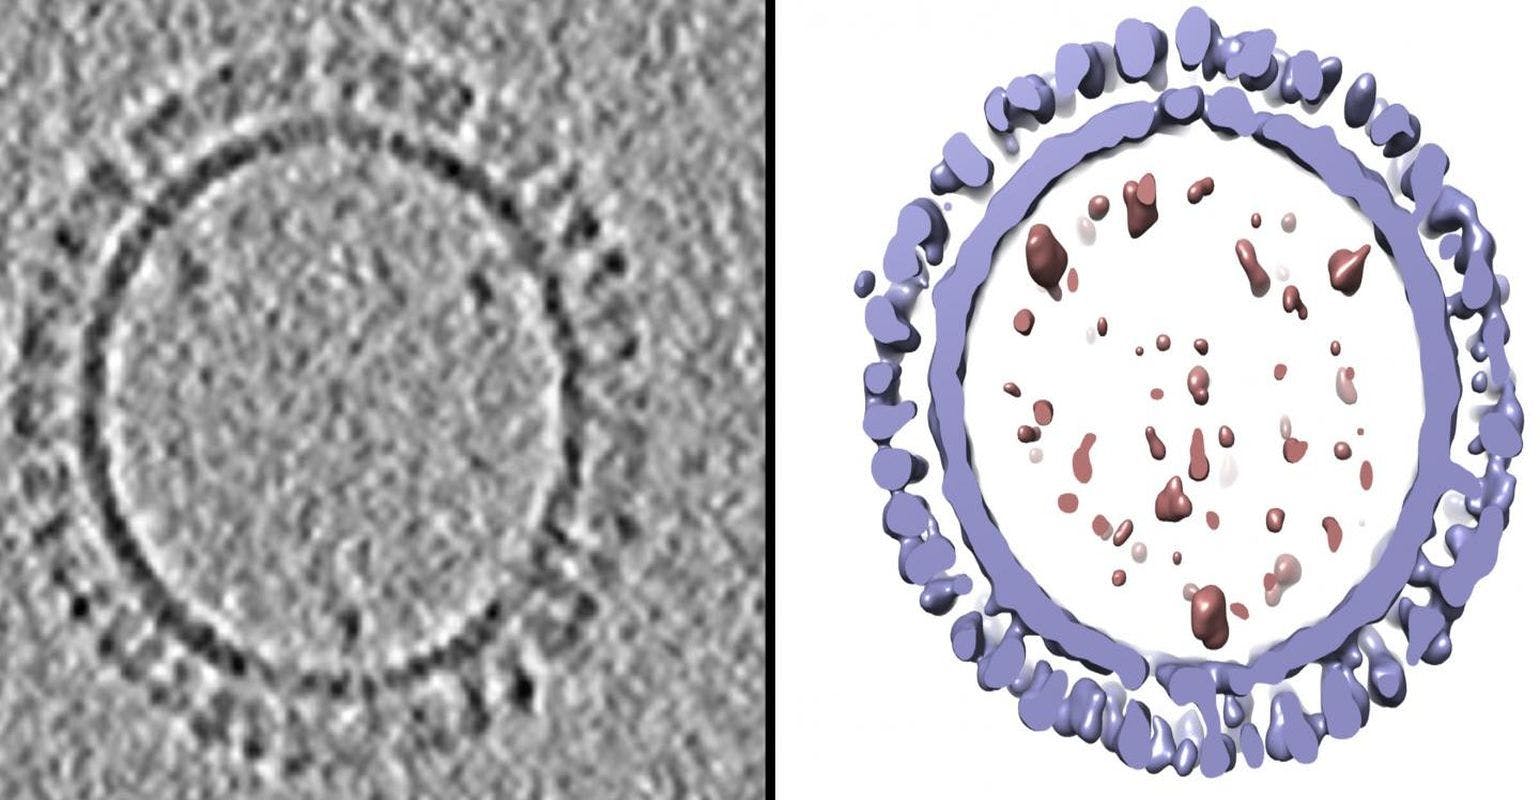 NIAID Scientists Create 3-D Structure of 1918 Influenza Virus-Like Particles